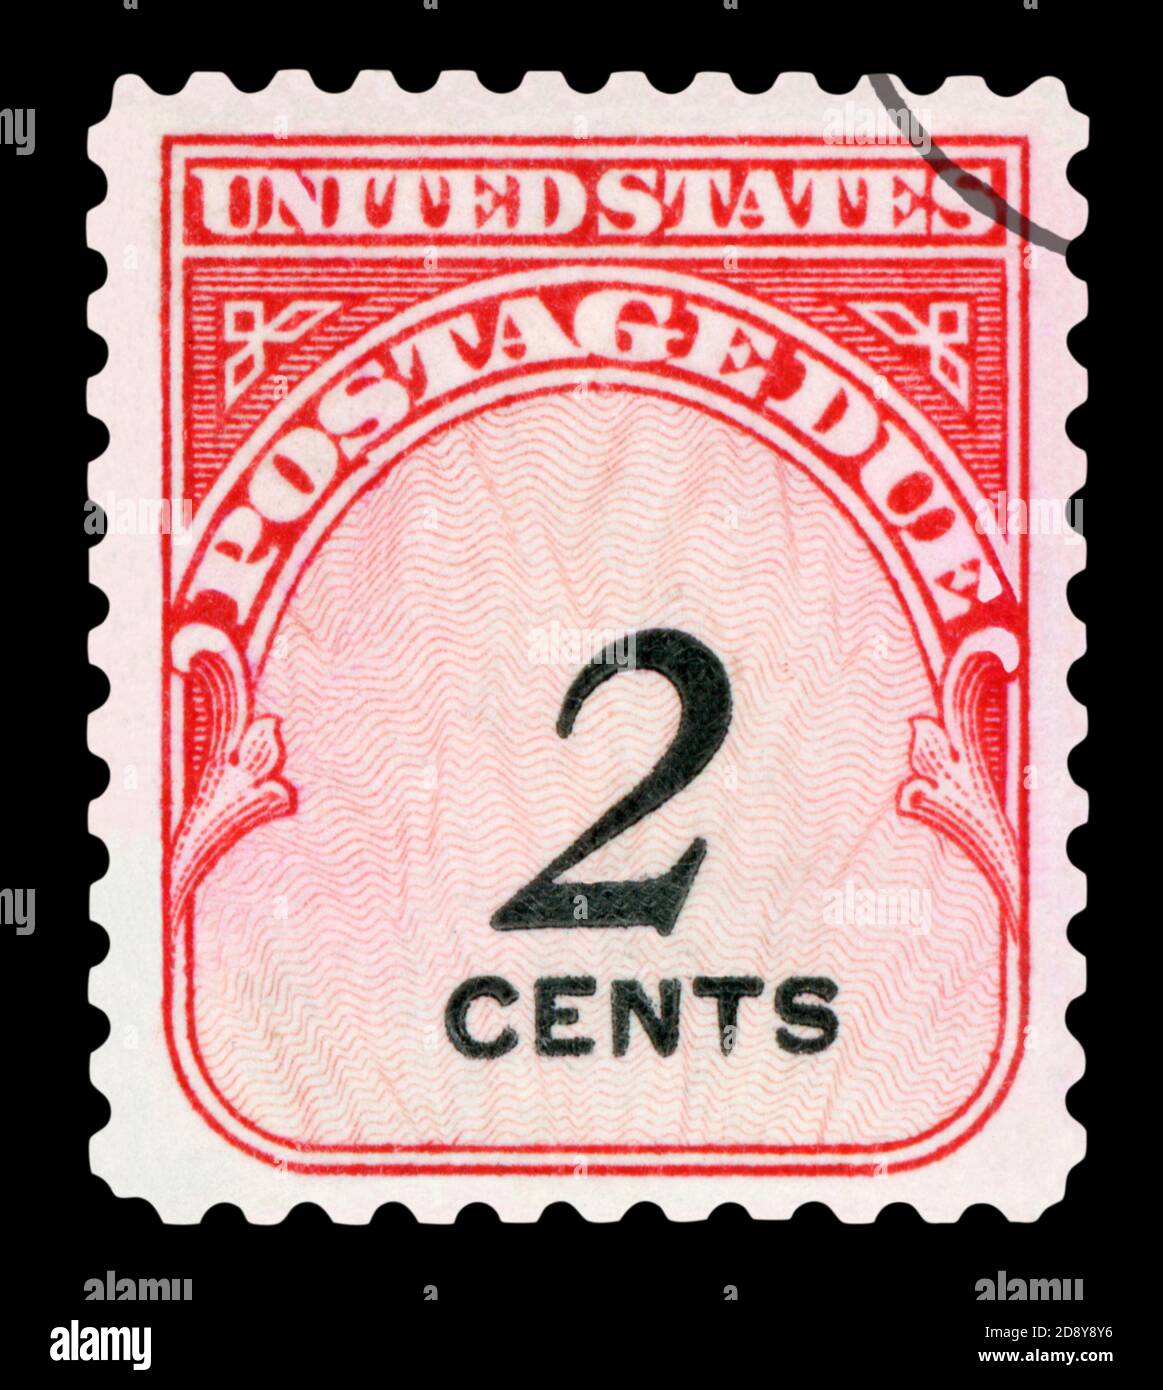 USA - CIRCA 1959: A stamp printed in USA shows the Stamp with denomination 2c value, circa 1959 Stock Photo